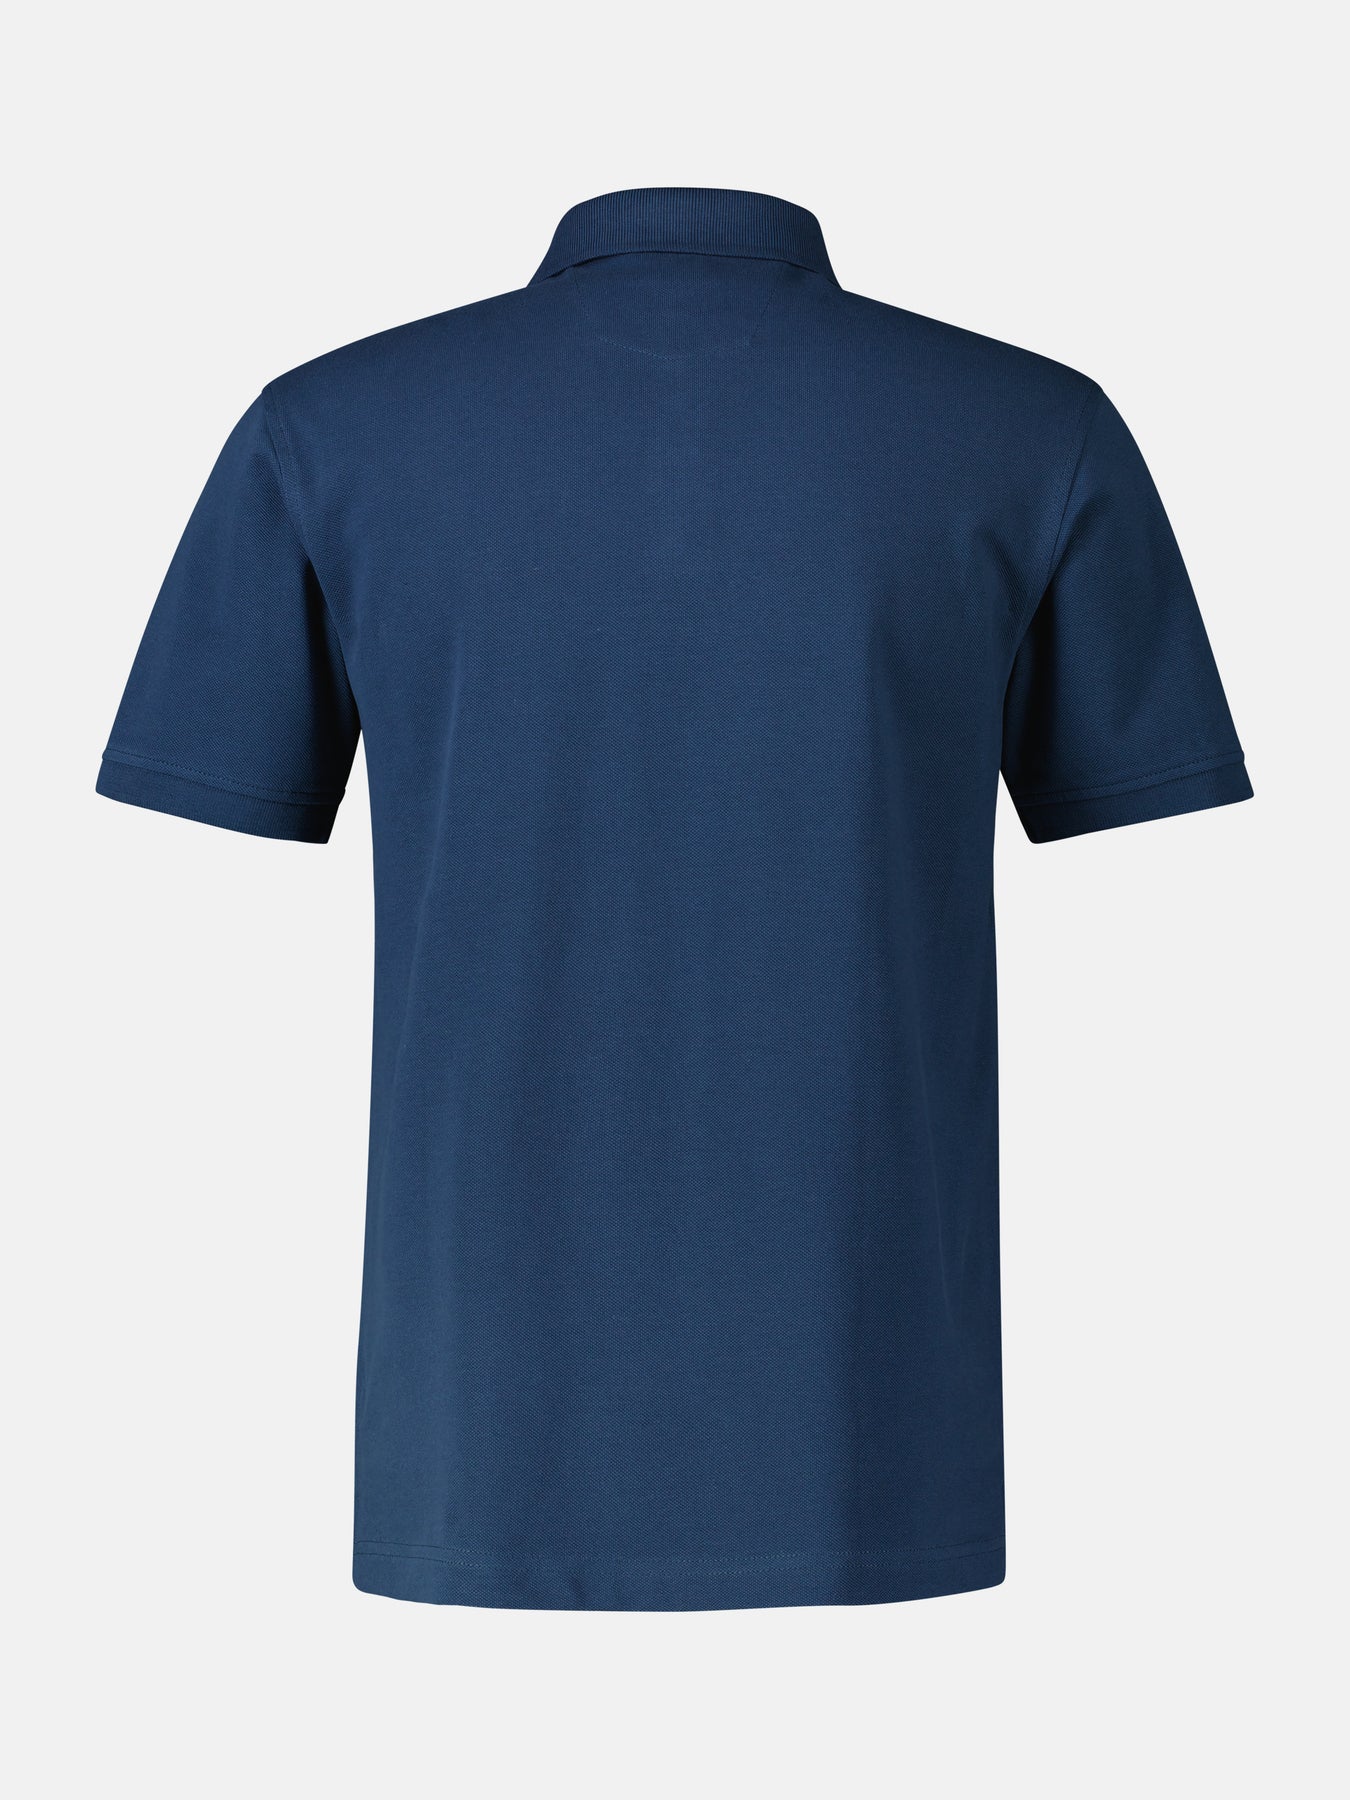 Polo shirt in – LERROS SHOP colors many